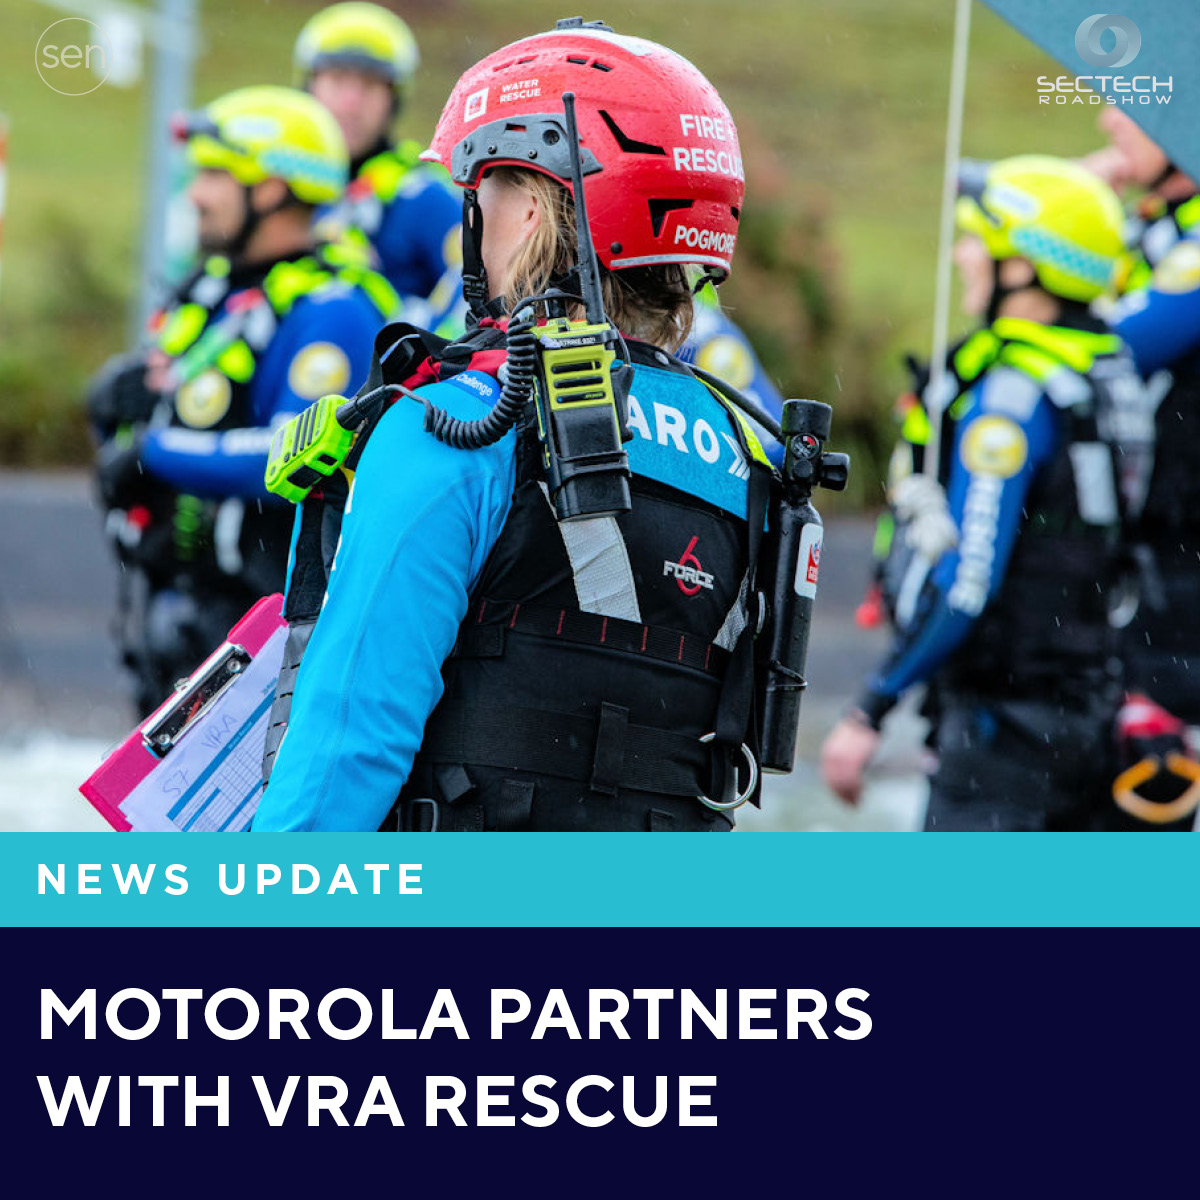 sen.news/motorola-partn…
'VRA Rescue NSW, has announced the deployment of SmartConnect from Motorola Solutions to extend its mission-critical radio communications.'
#emergency #safetyandsecurity #communications #securitymanagement #lawenforcement #rescure #radio #smartcities #SEN